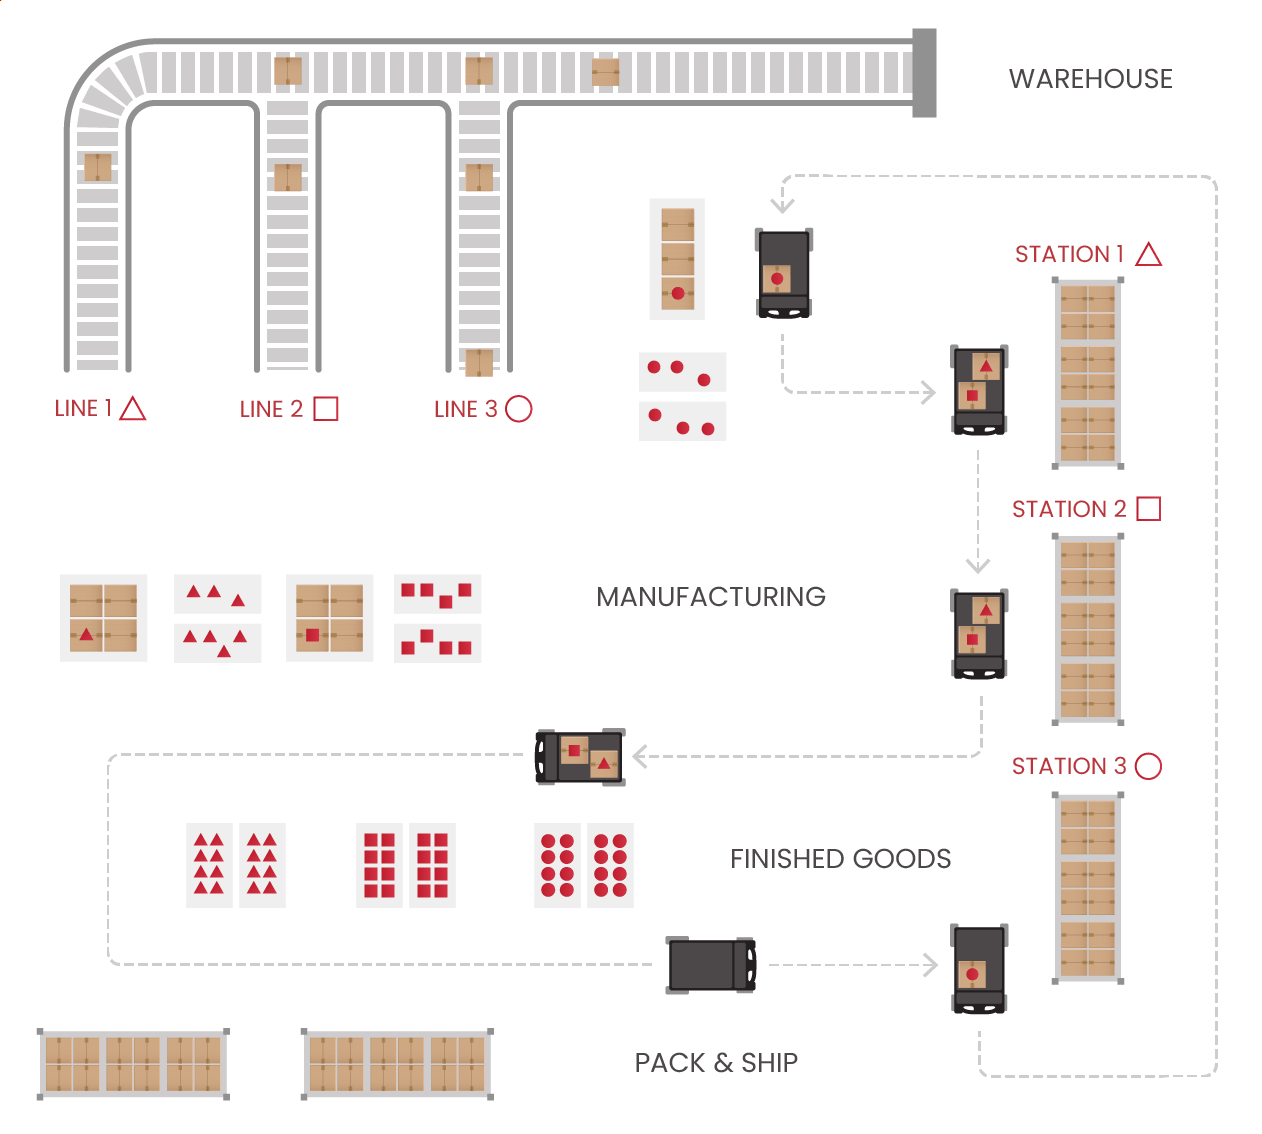 Diagram of MARC cart operating in a warehouse